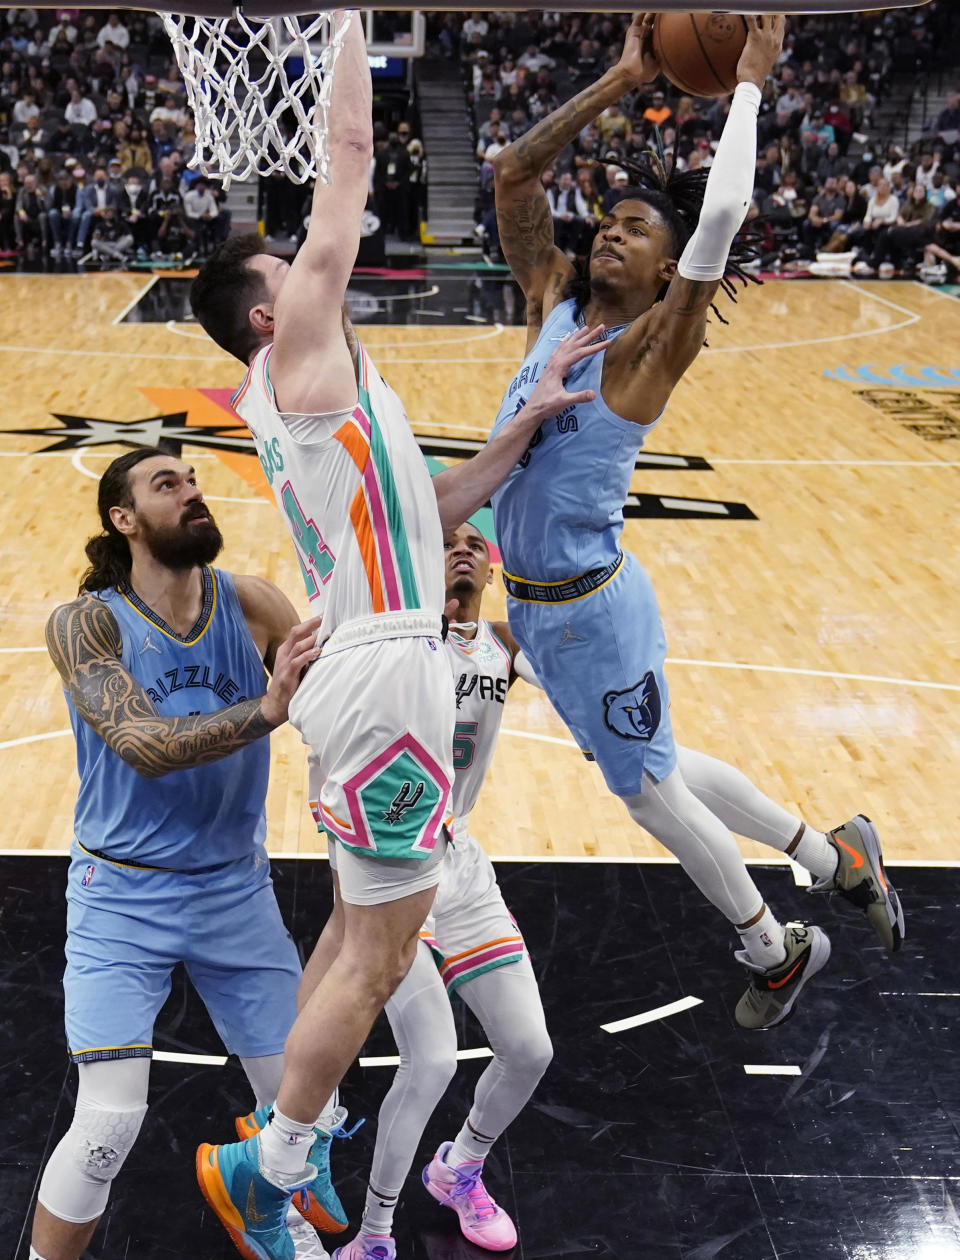 Memphis Grizzlies guard Ja Morant (12) drives to the basket against San Antonio Spurs forward Drew Eubanks (14) during the second half of an NBA basketball game, Wednesday, Jan. 26, 2022, in San Antonio. (AP Photo/Eric Gay)